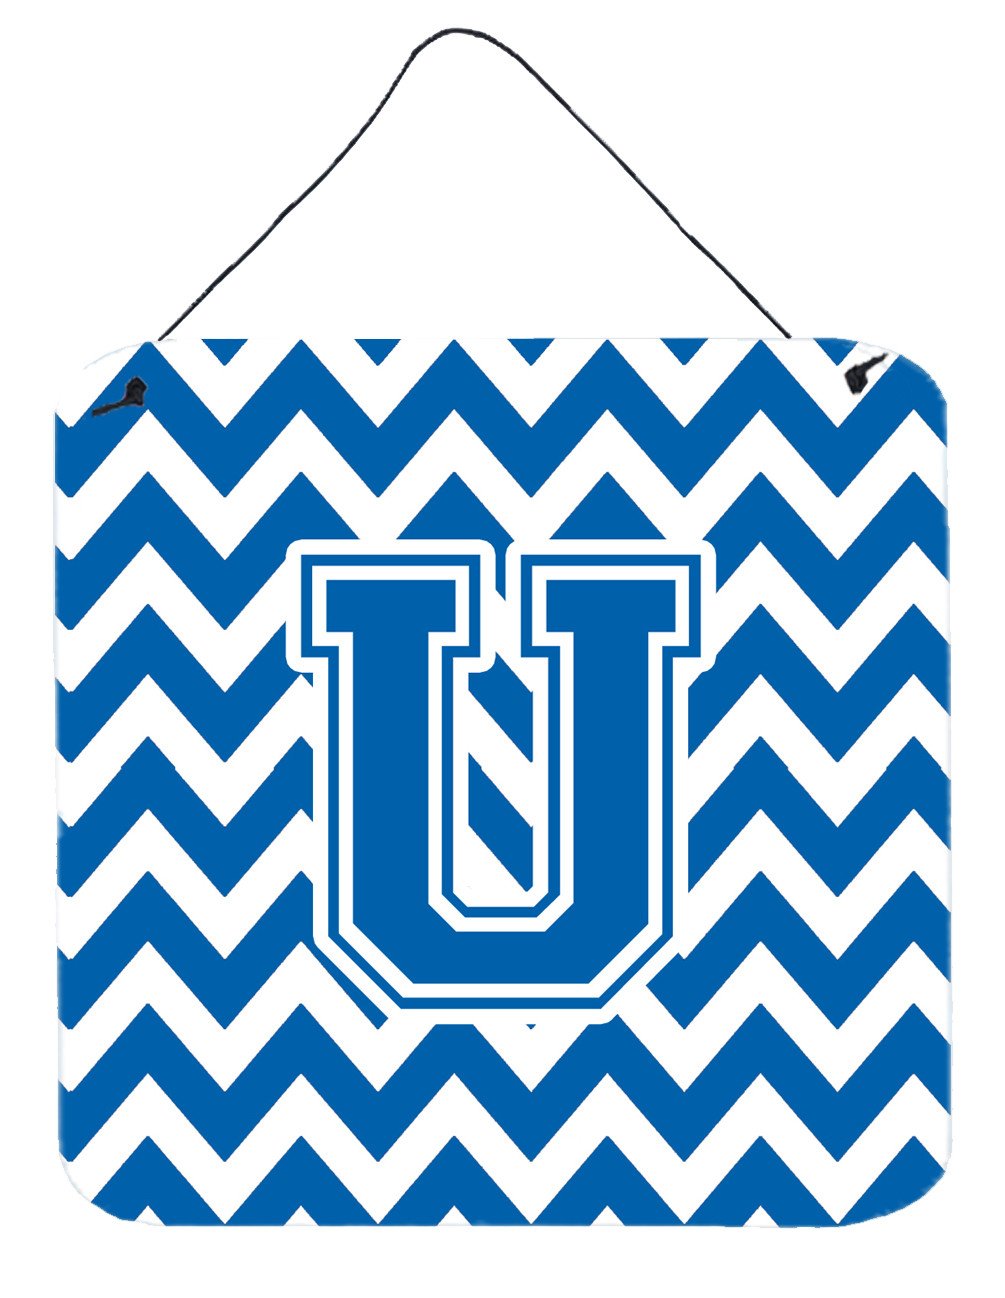 Letter U Chevron Blue and White Wall or Door Hanging Prints CJ1056-UDS66 by Caroline's Treasures